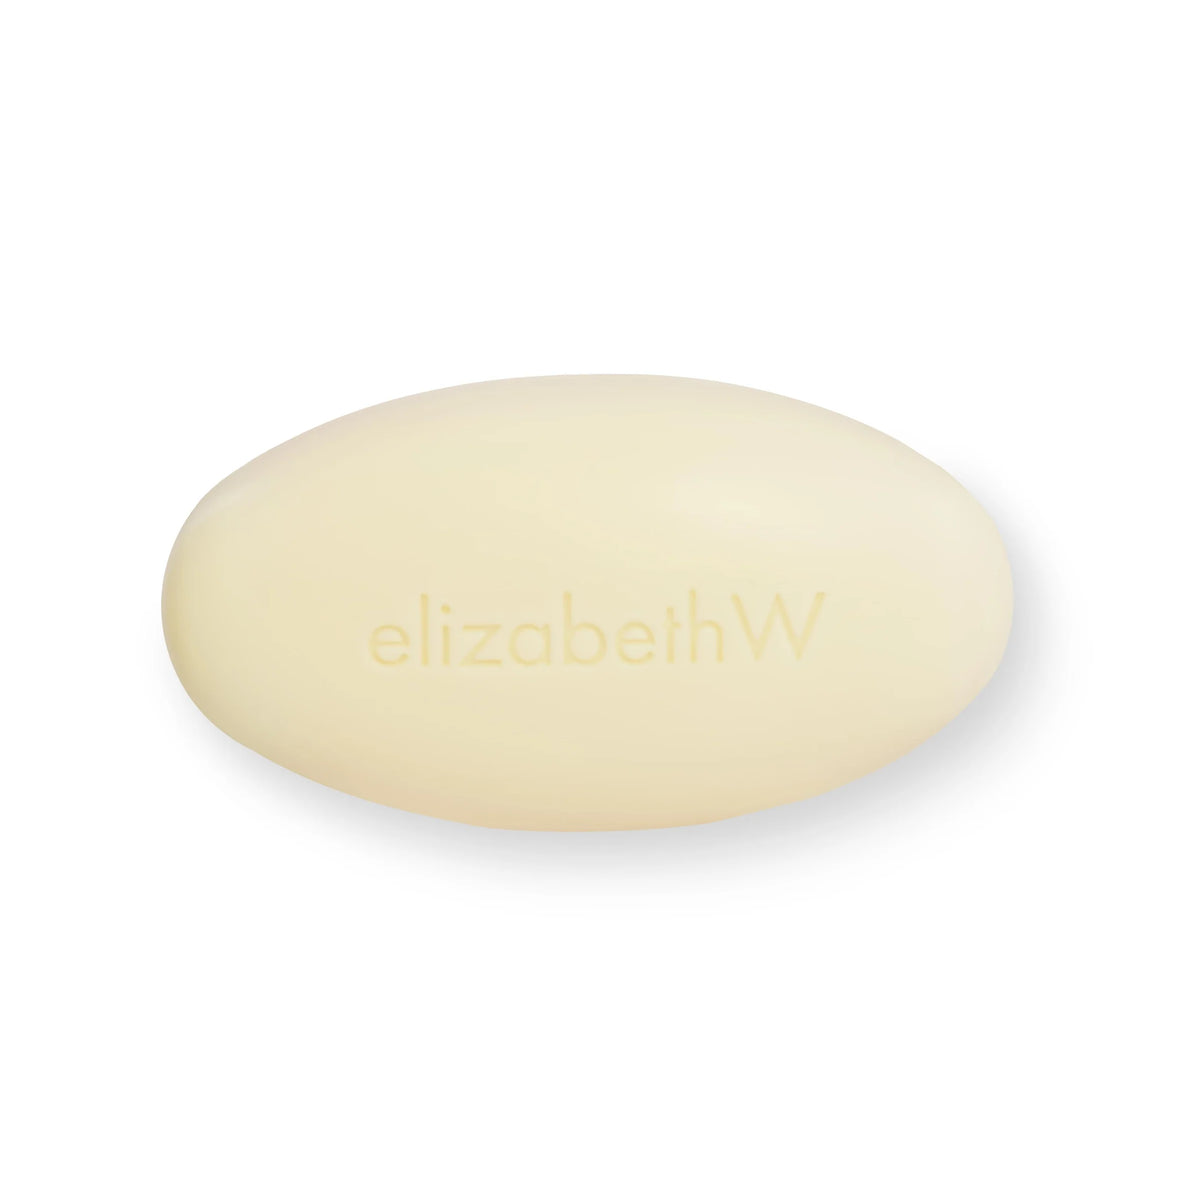 A single oval-shaped, pale yellow, triple-milled bar soap with the embossed brand name "elizabeth W" on a white background.